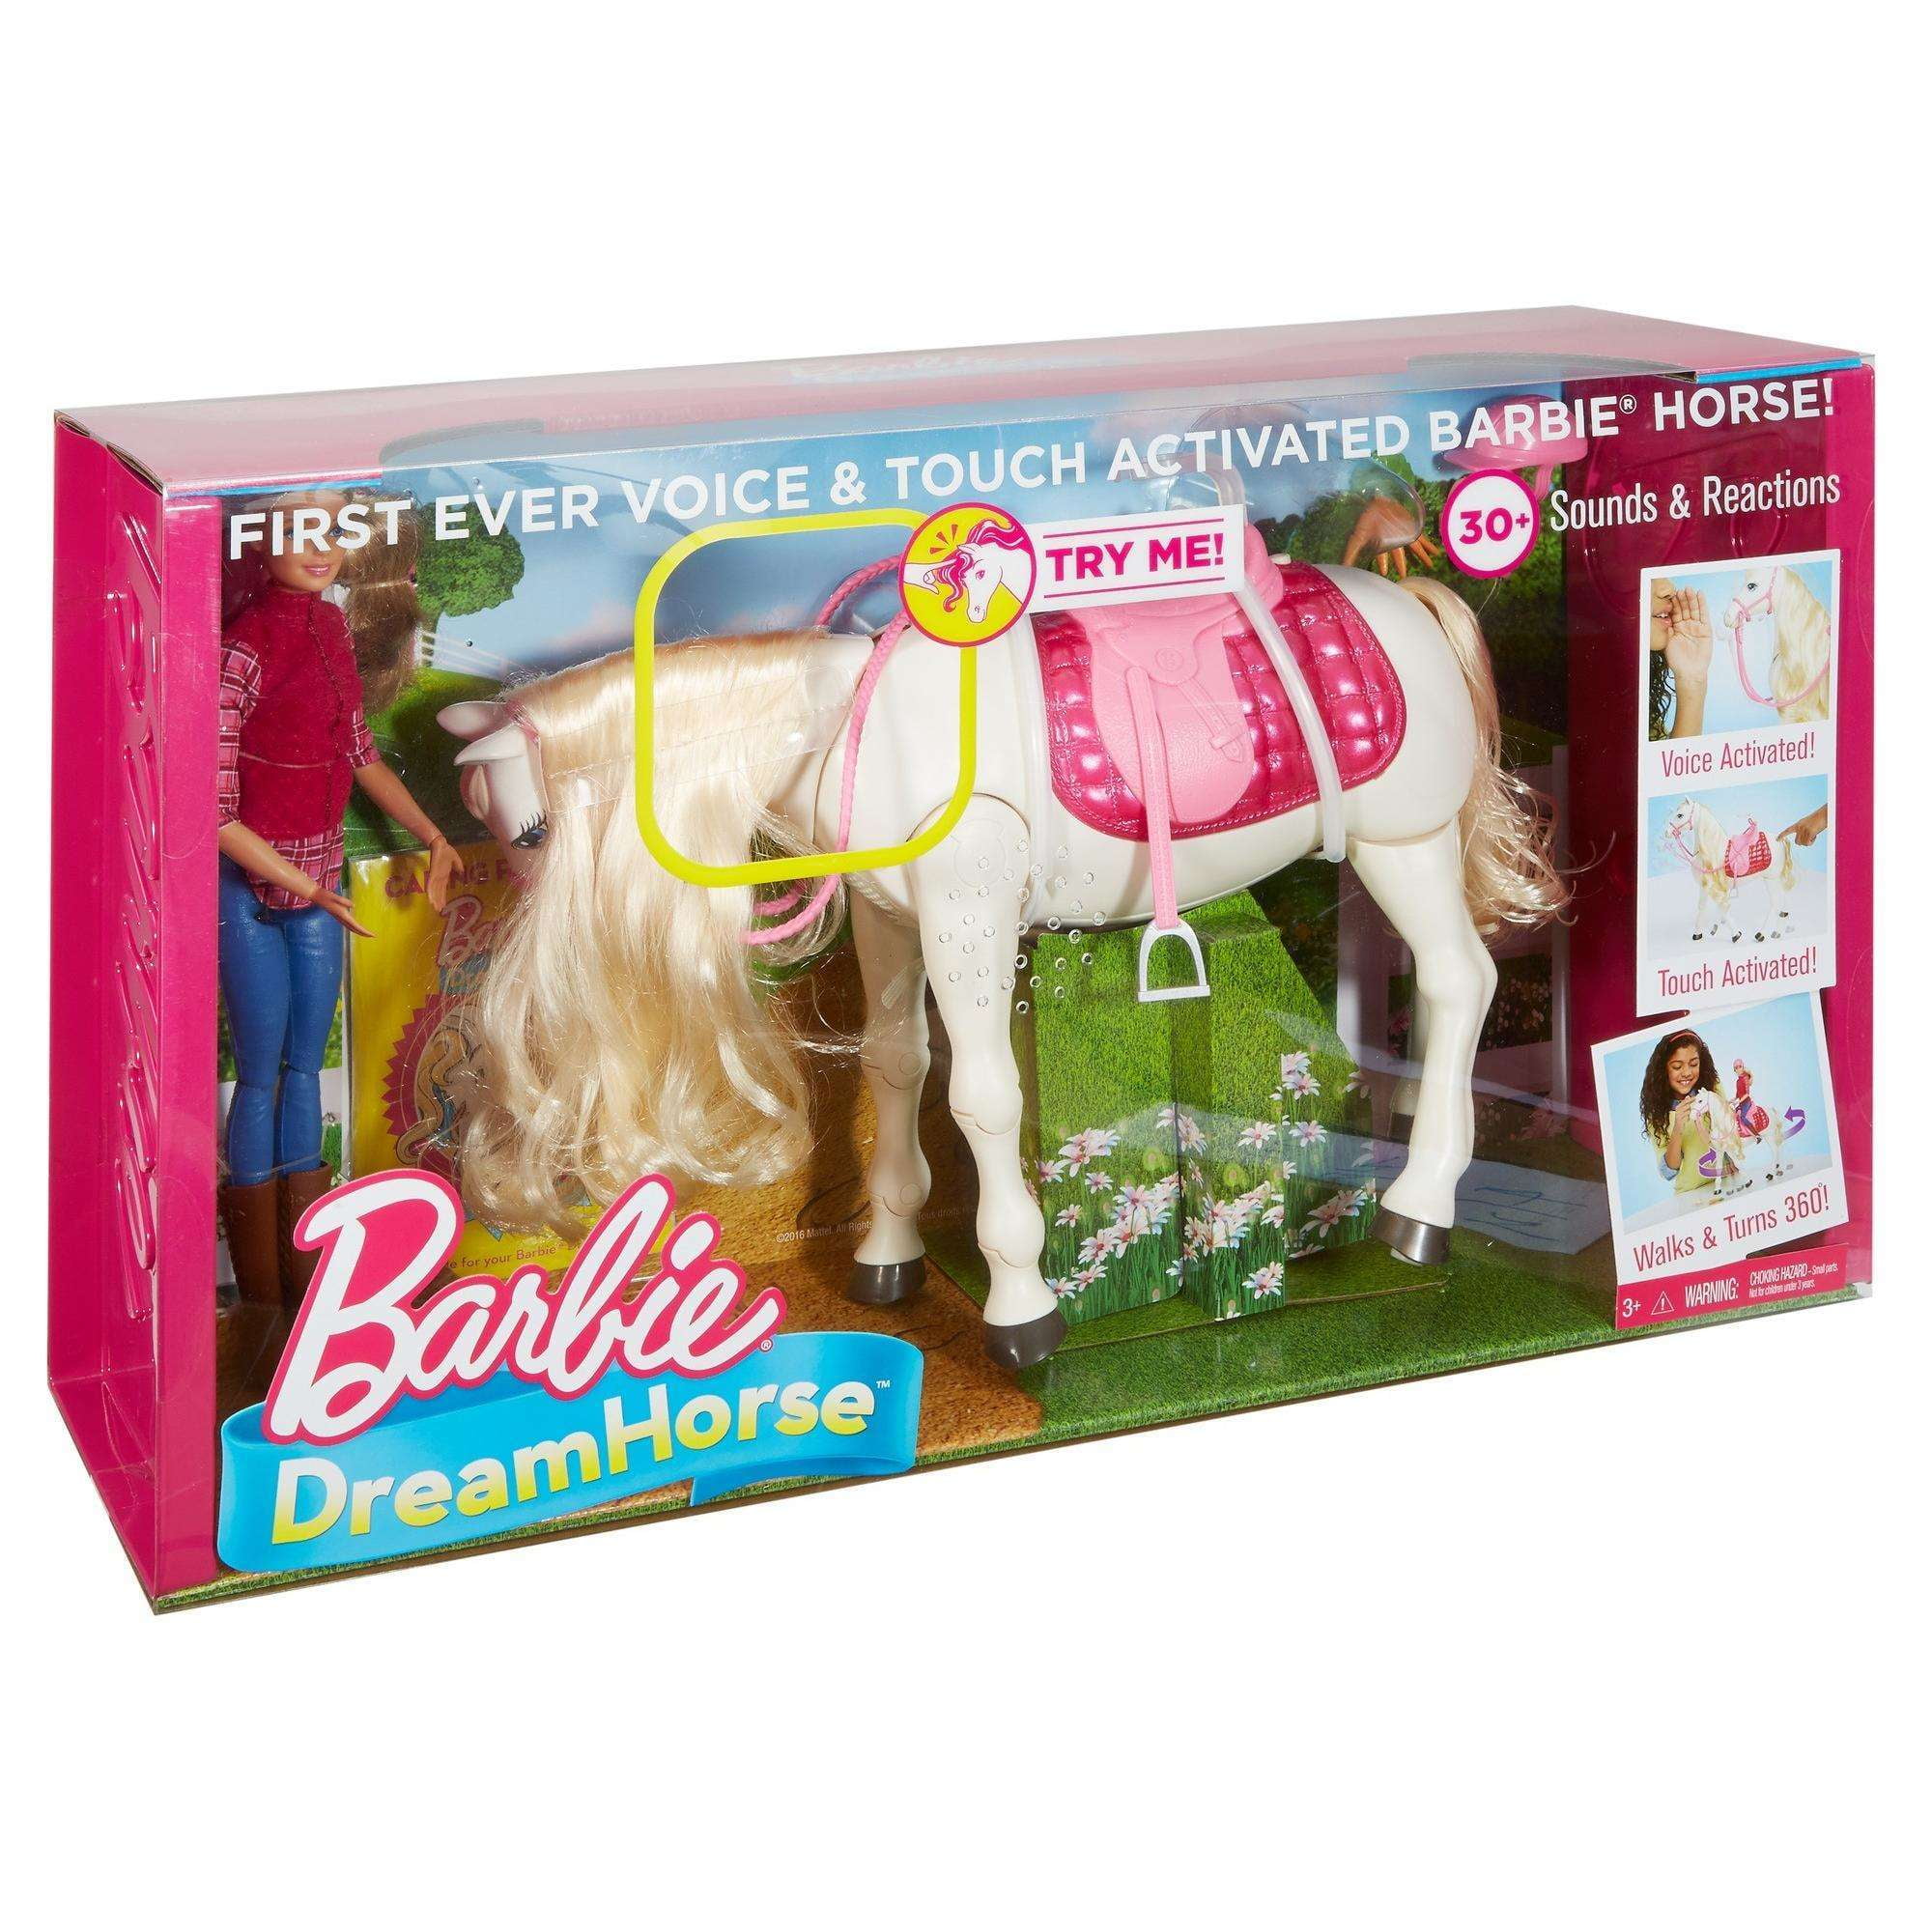 Meeting Revolutionary director Barbie DreamHorse & Blonde Doll, Interactive Toy with 30+ Reactions -  Walmart.com